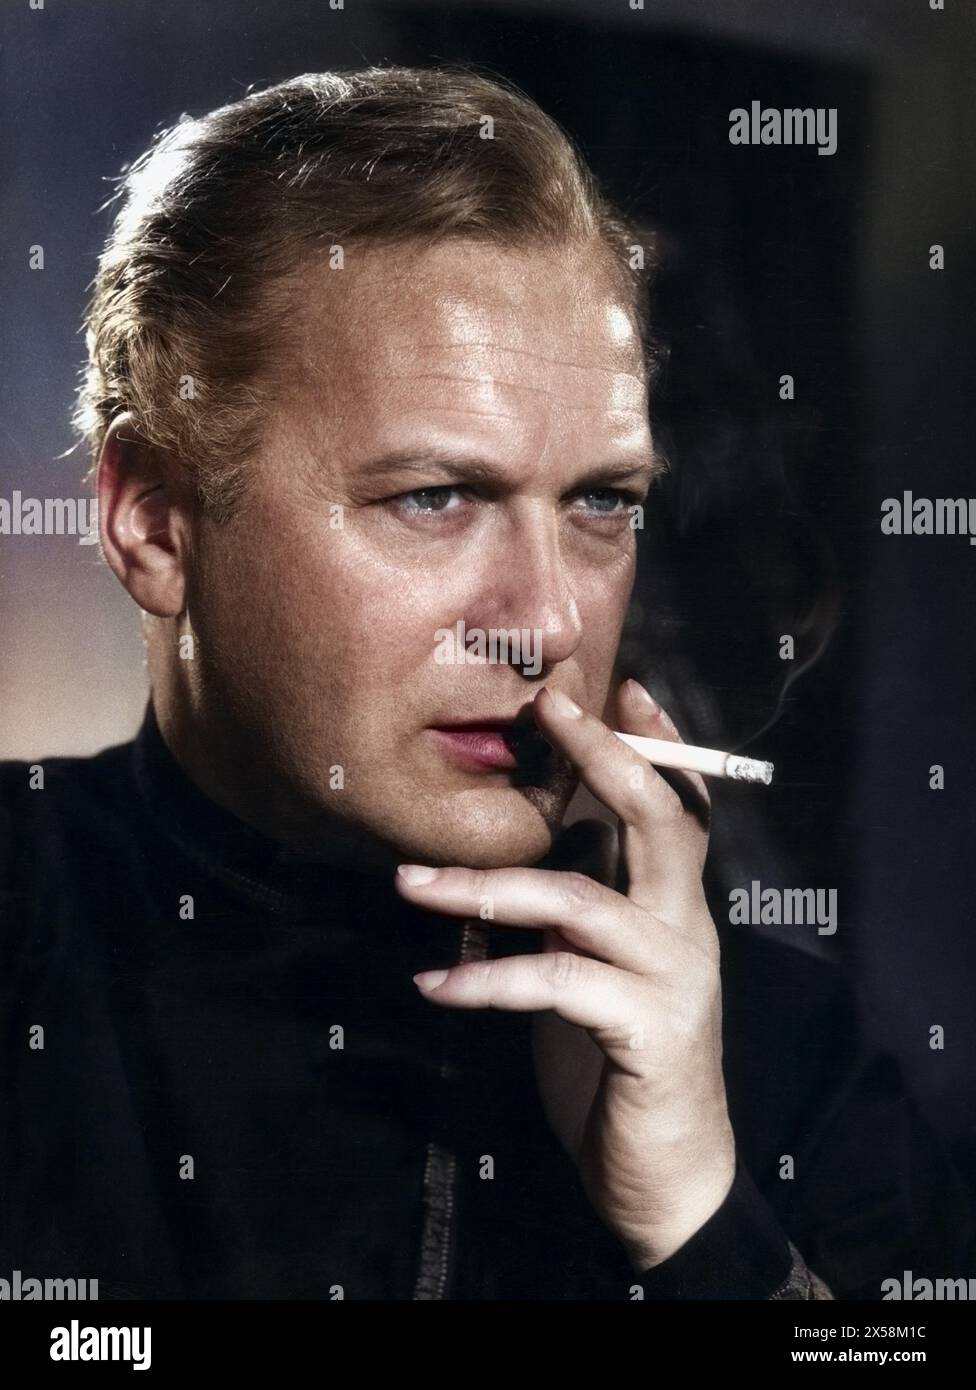 Juergens, Curd, 13.12.1915 - 18.6.1982, German actor, portrait, smoking cigarette, 1950s, ADDITIONAL-RIGHTS-CLEARANCE-INFO-NOT-AVAILABLE Stock Photo